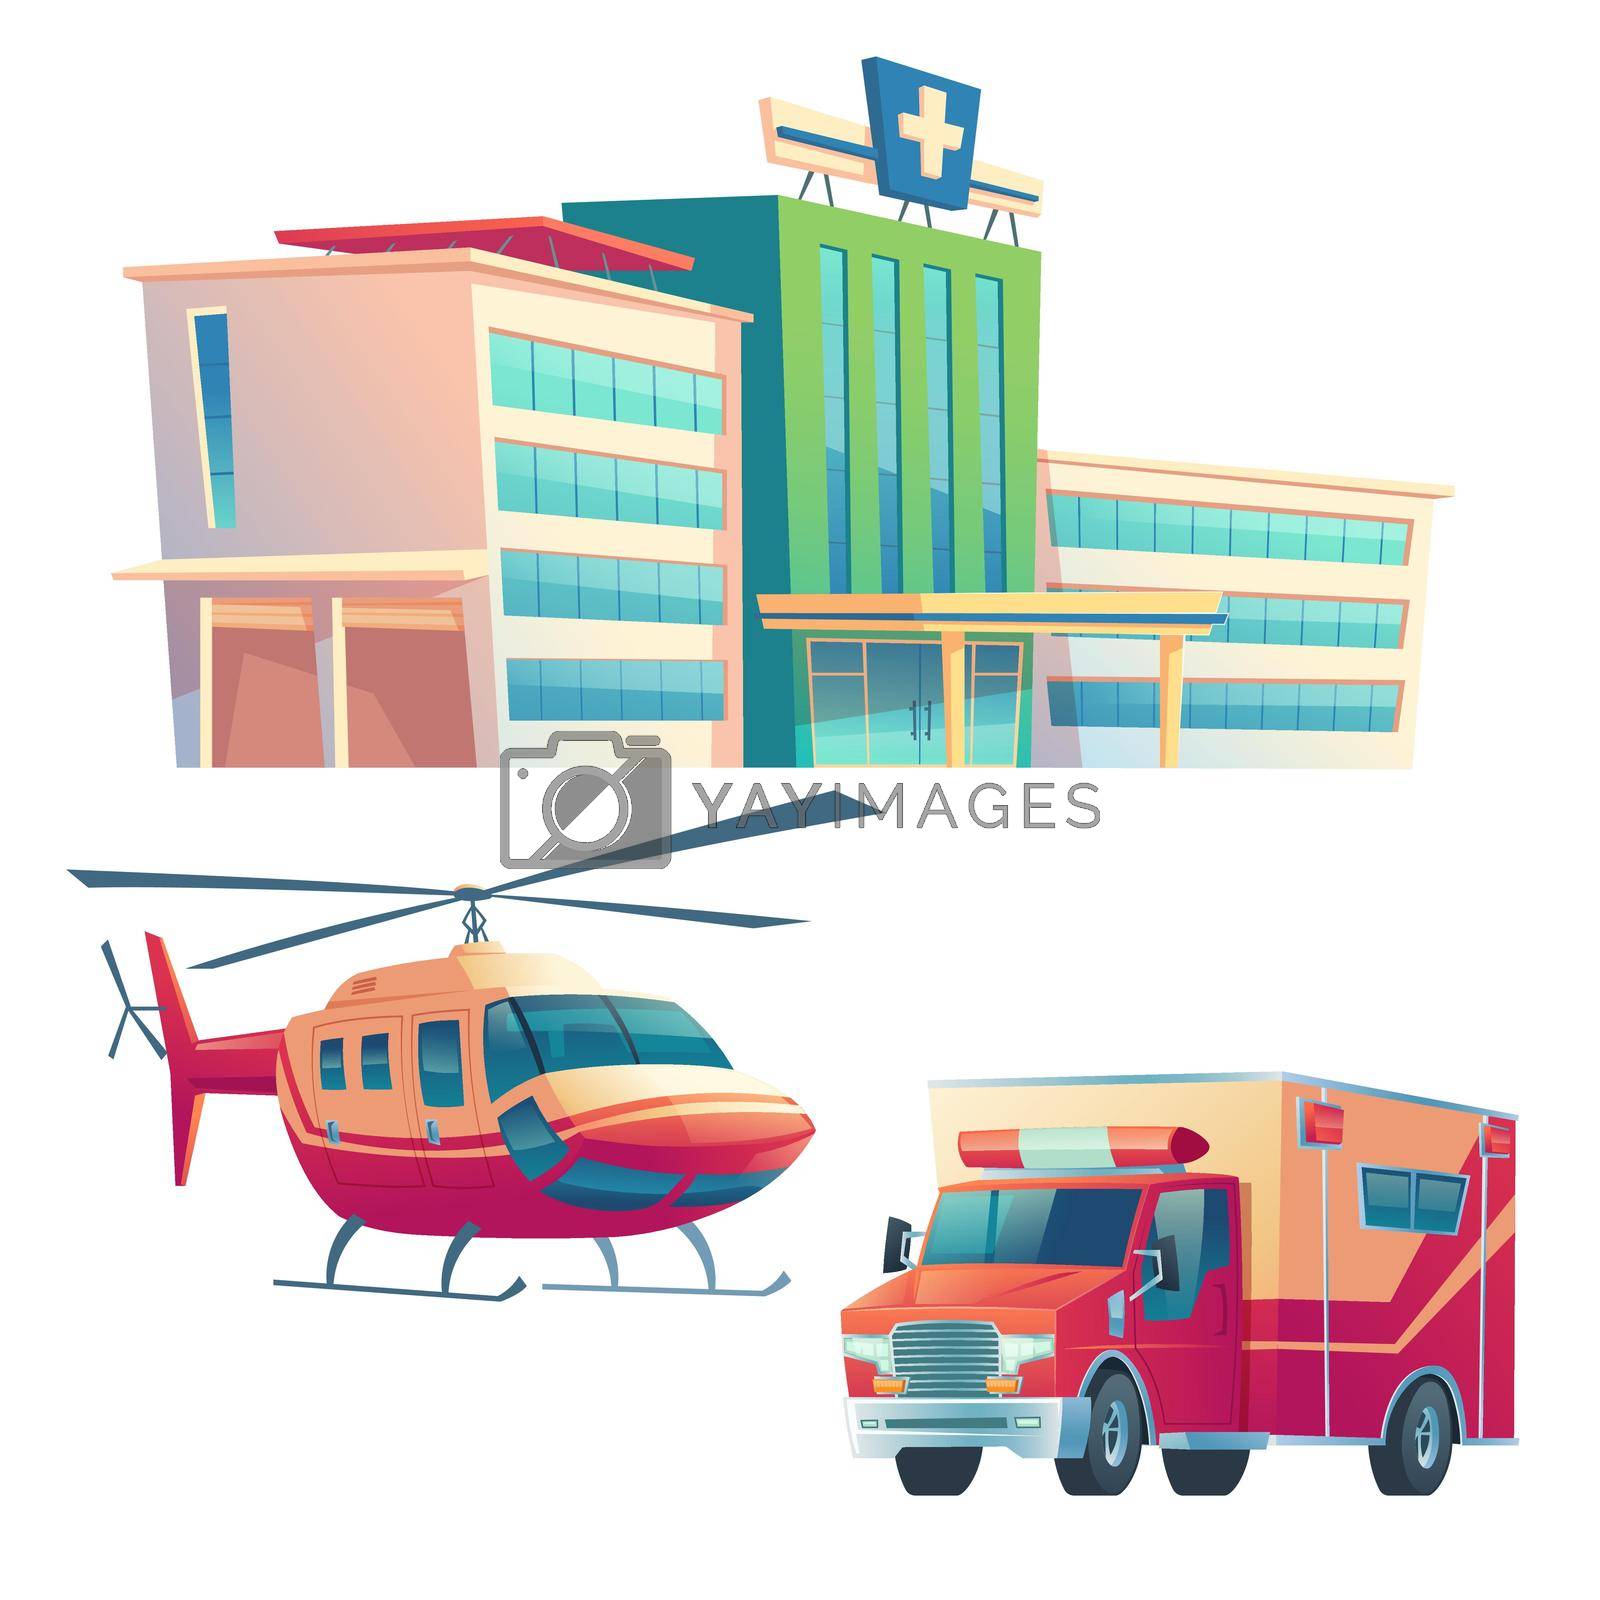 Royalty free image of Hospital building, ambulance car and helicopter by vectorart